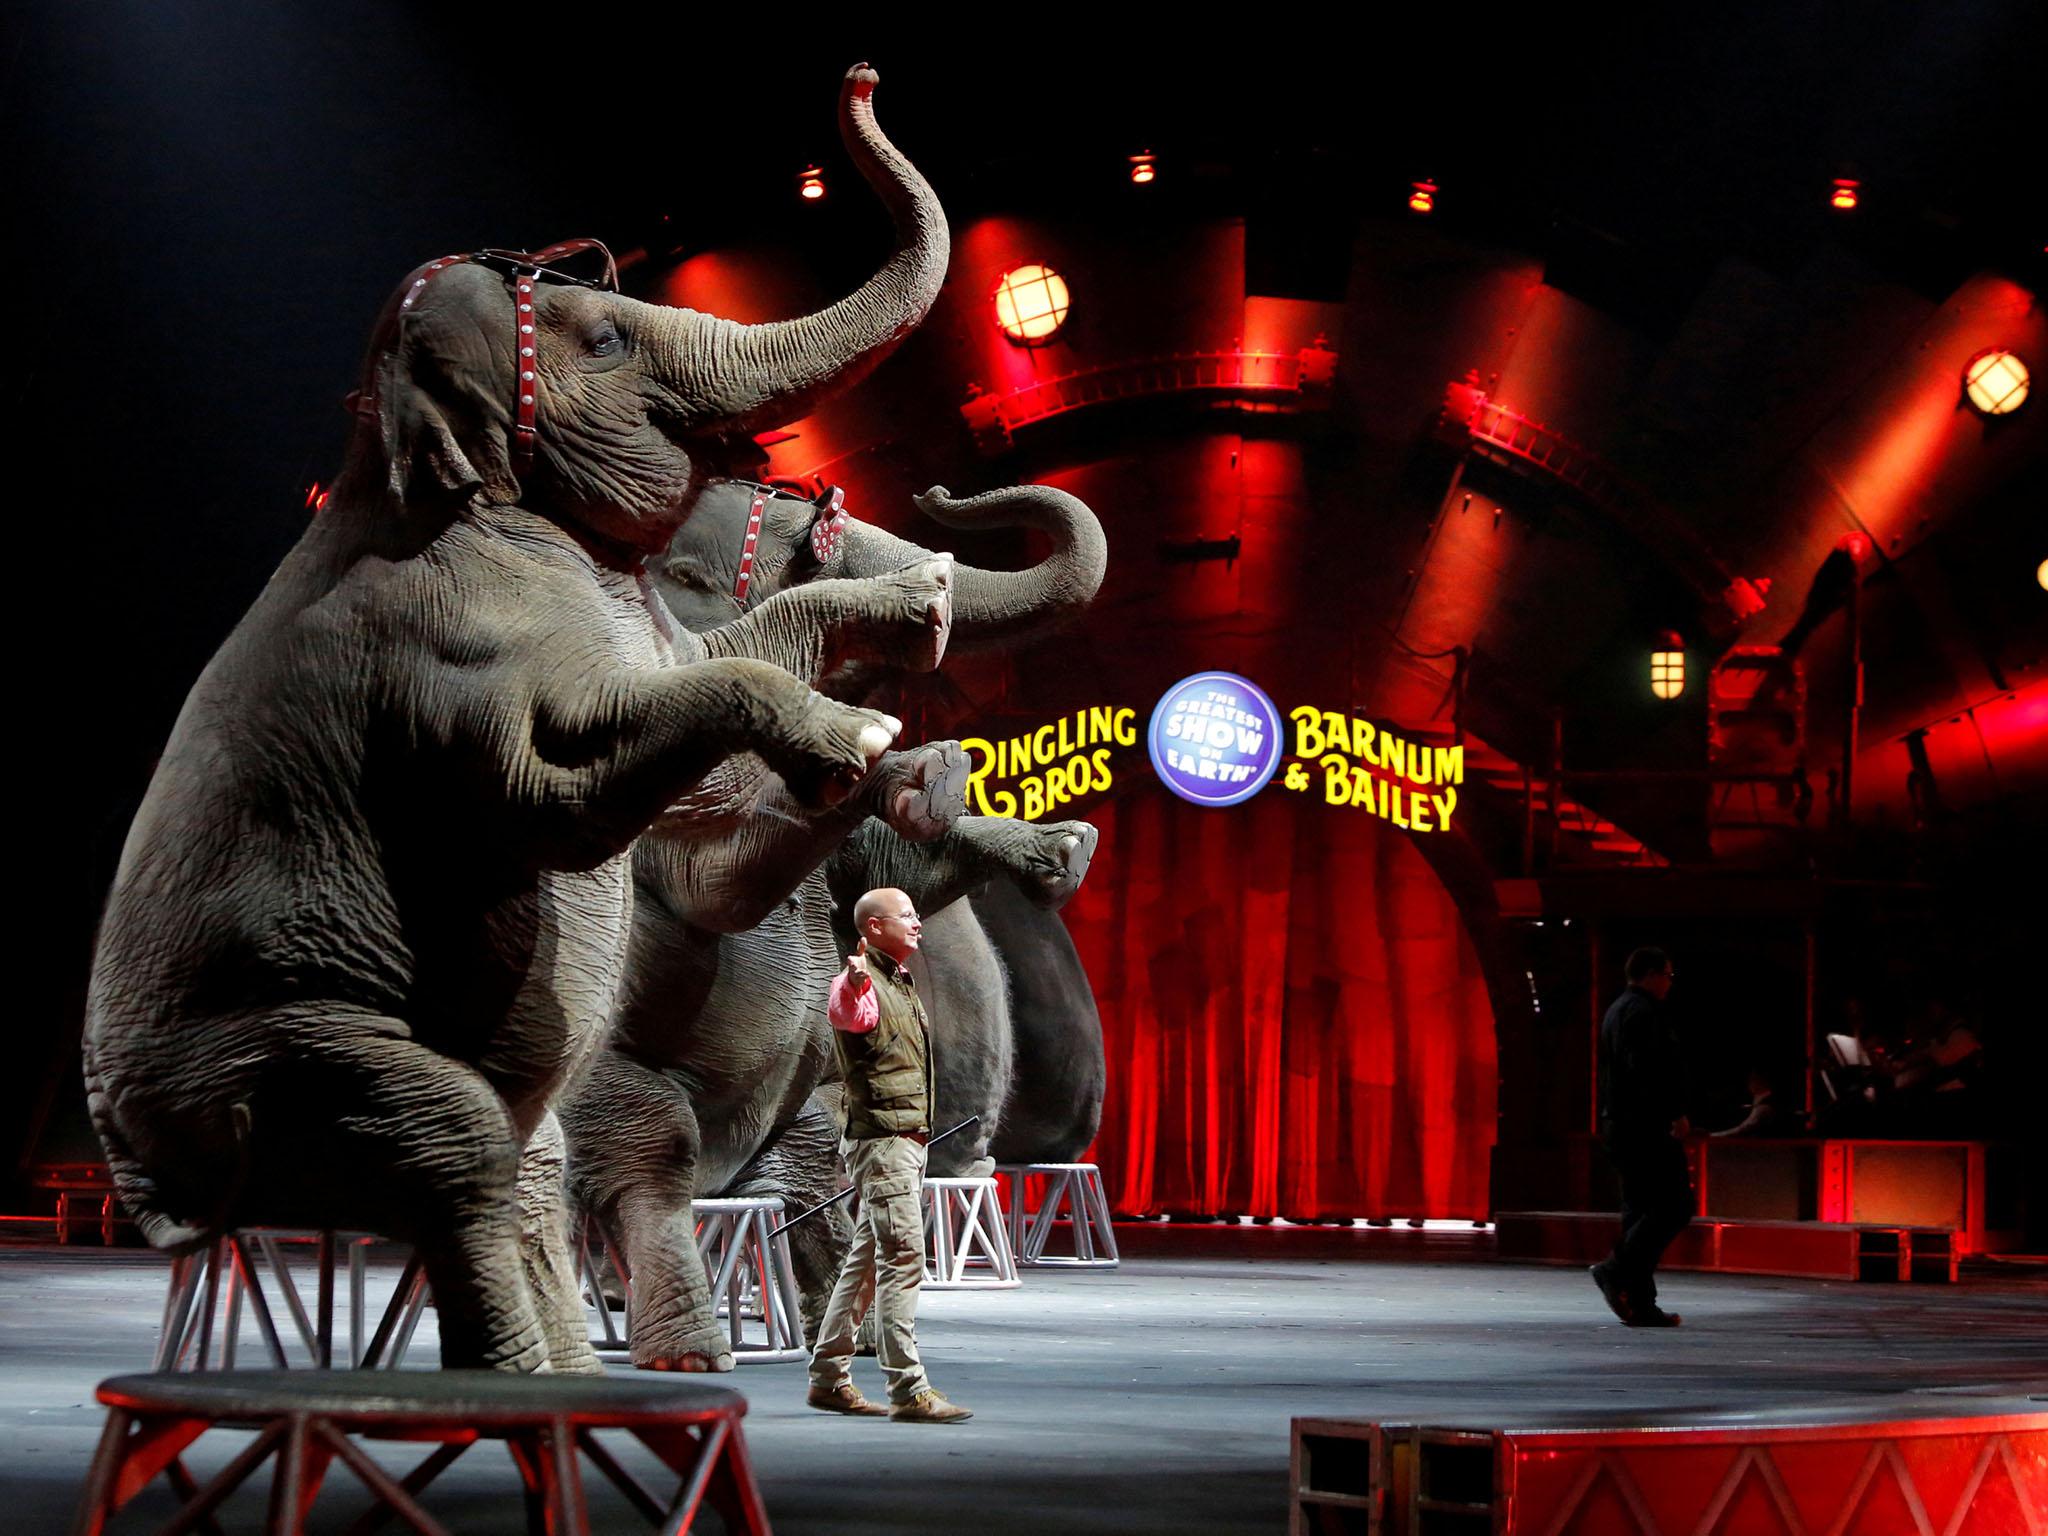 Ringling Bros and Barnum & Bailey circus elephants perform during Barnum’s FUNundrum in New York in 2010